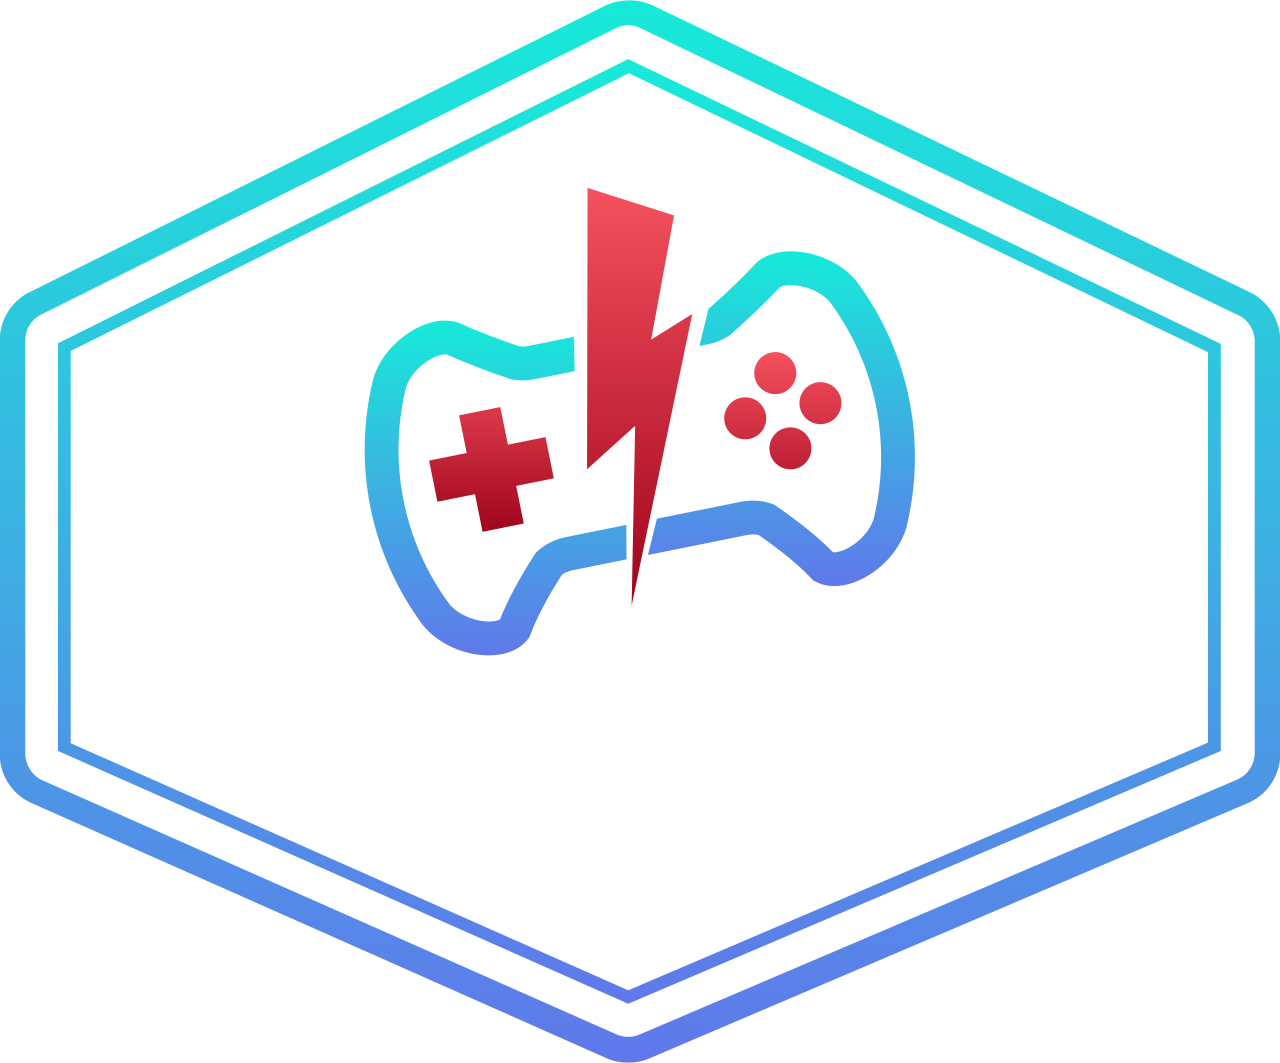 wing gaming's web page